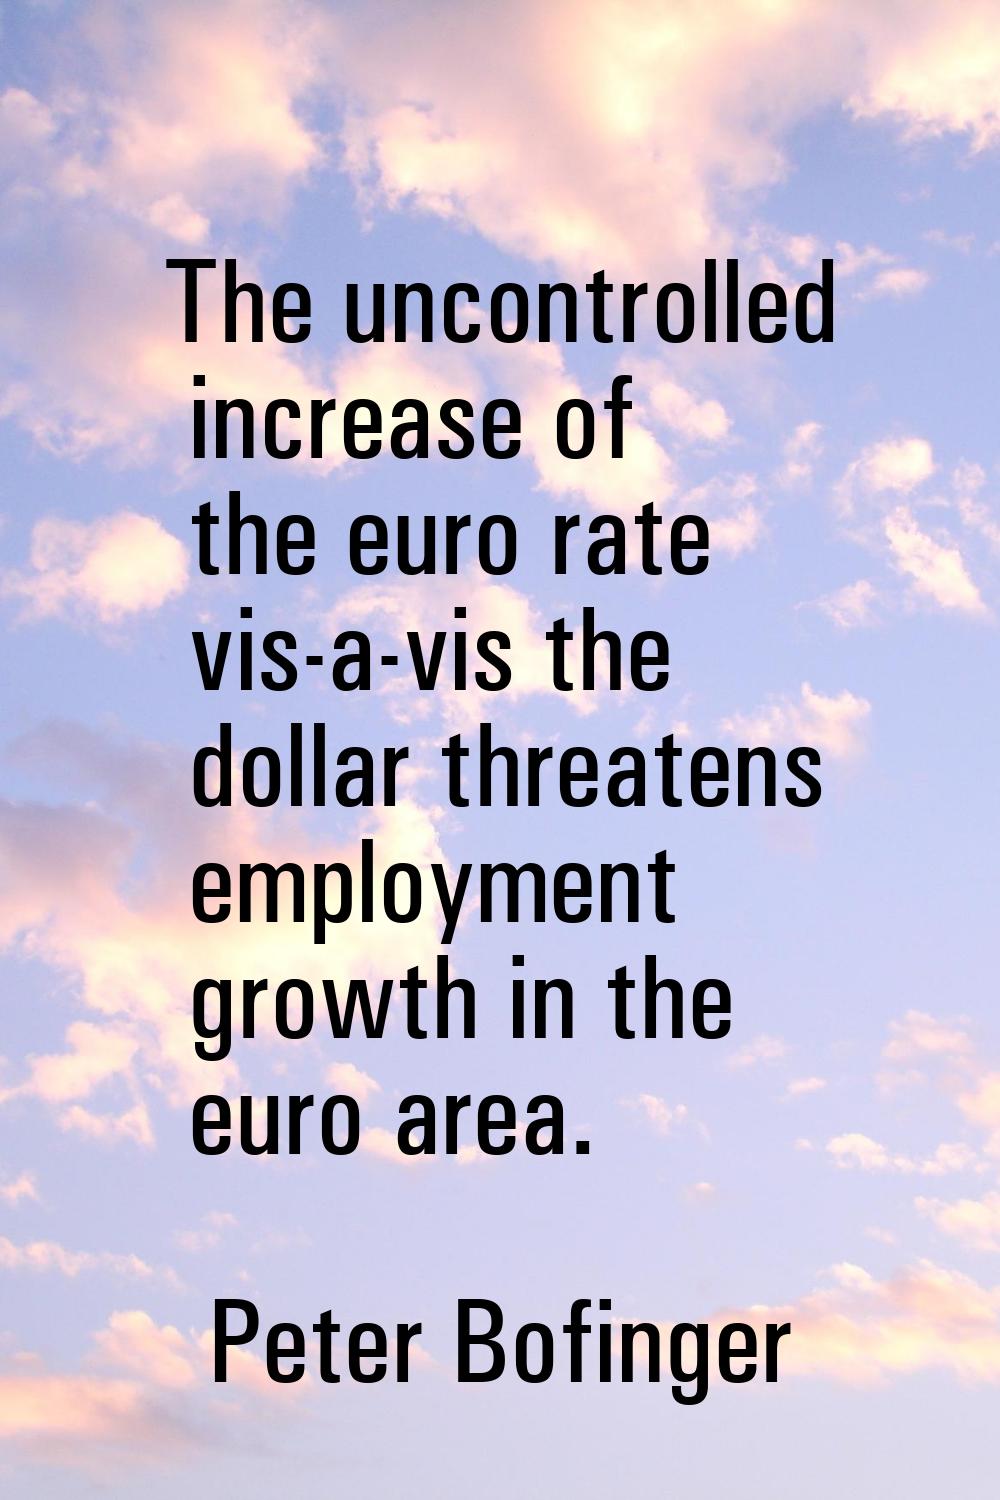 The uncontrolled increase of the euro rate vis-a-vis the dollar threatens employment growth in the 